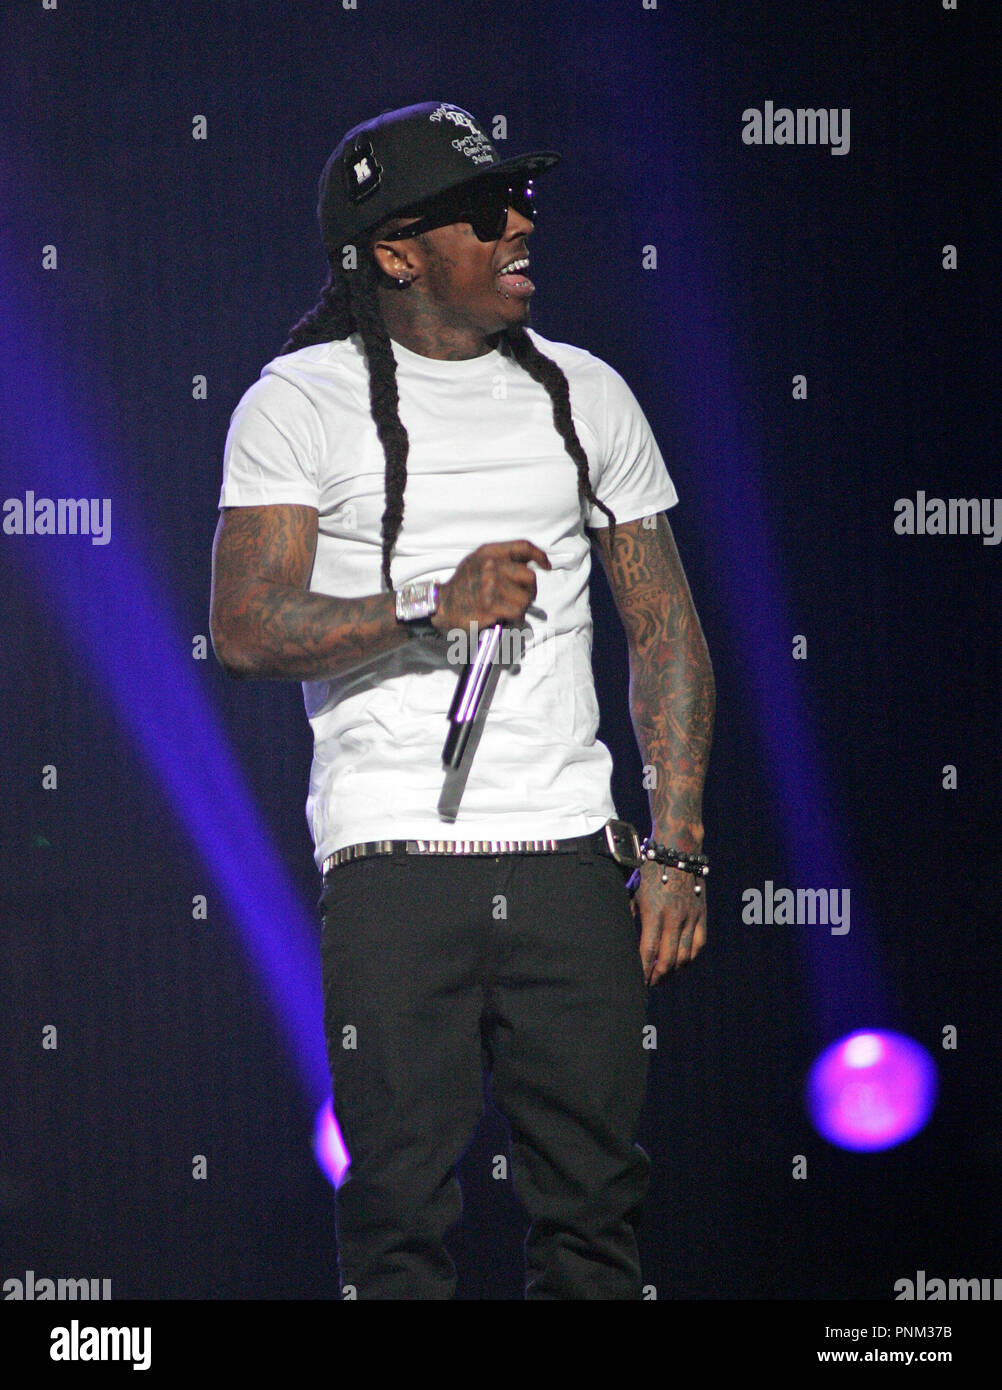 Lil Wayne performs in concert at the BankAtlantic Center in Sunrise, Florida on April 5, 2011. Stock Photo